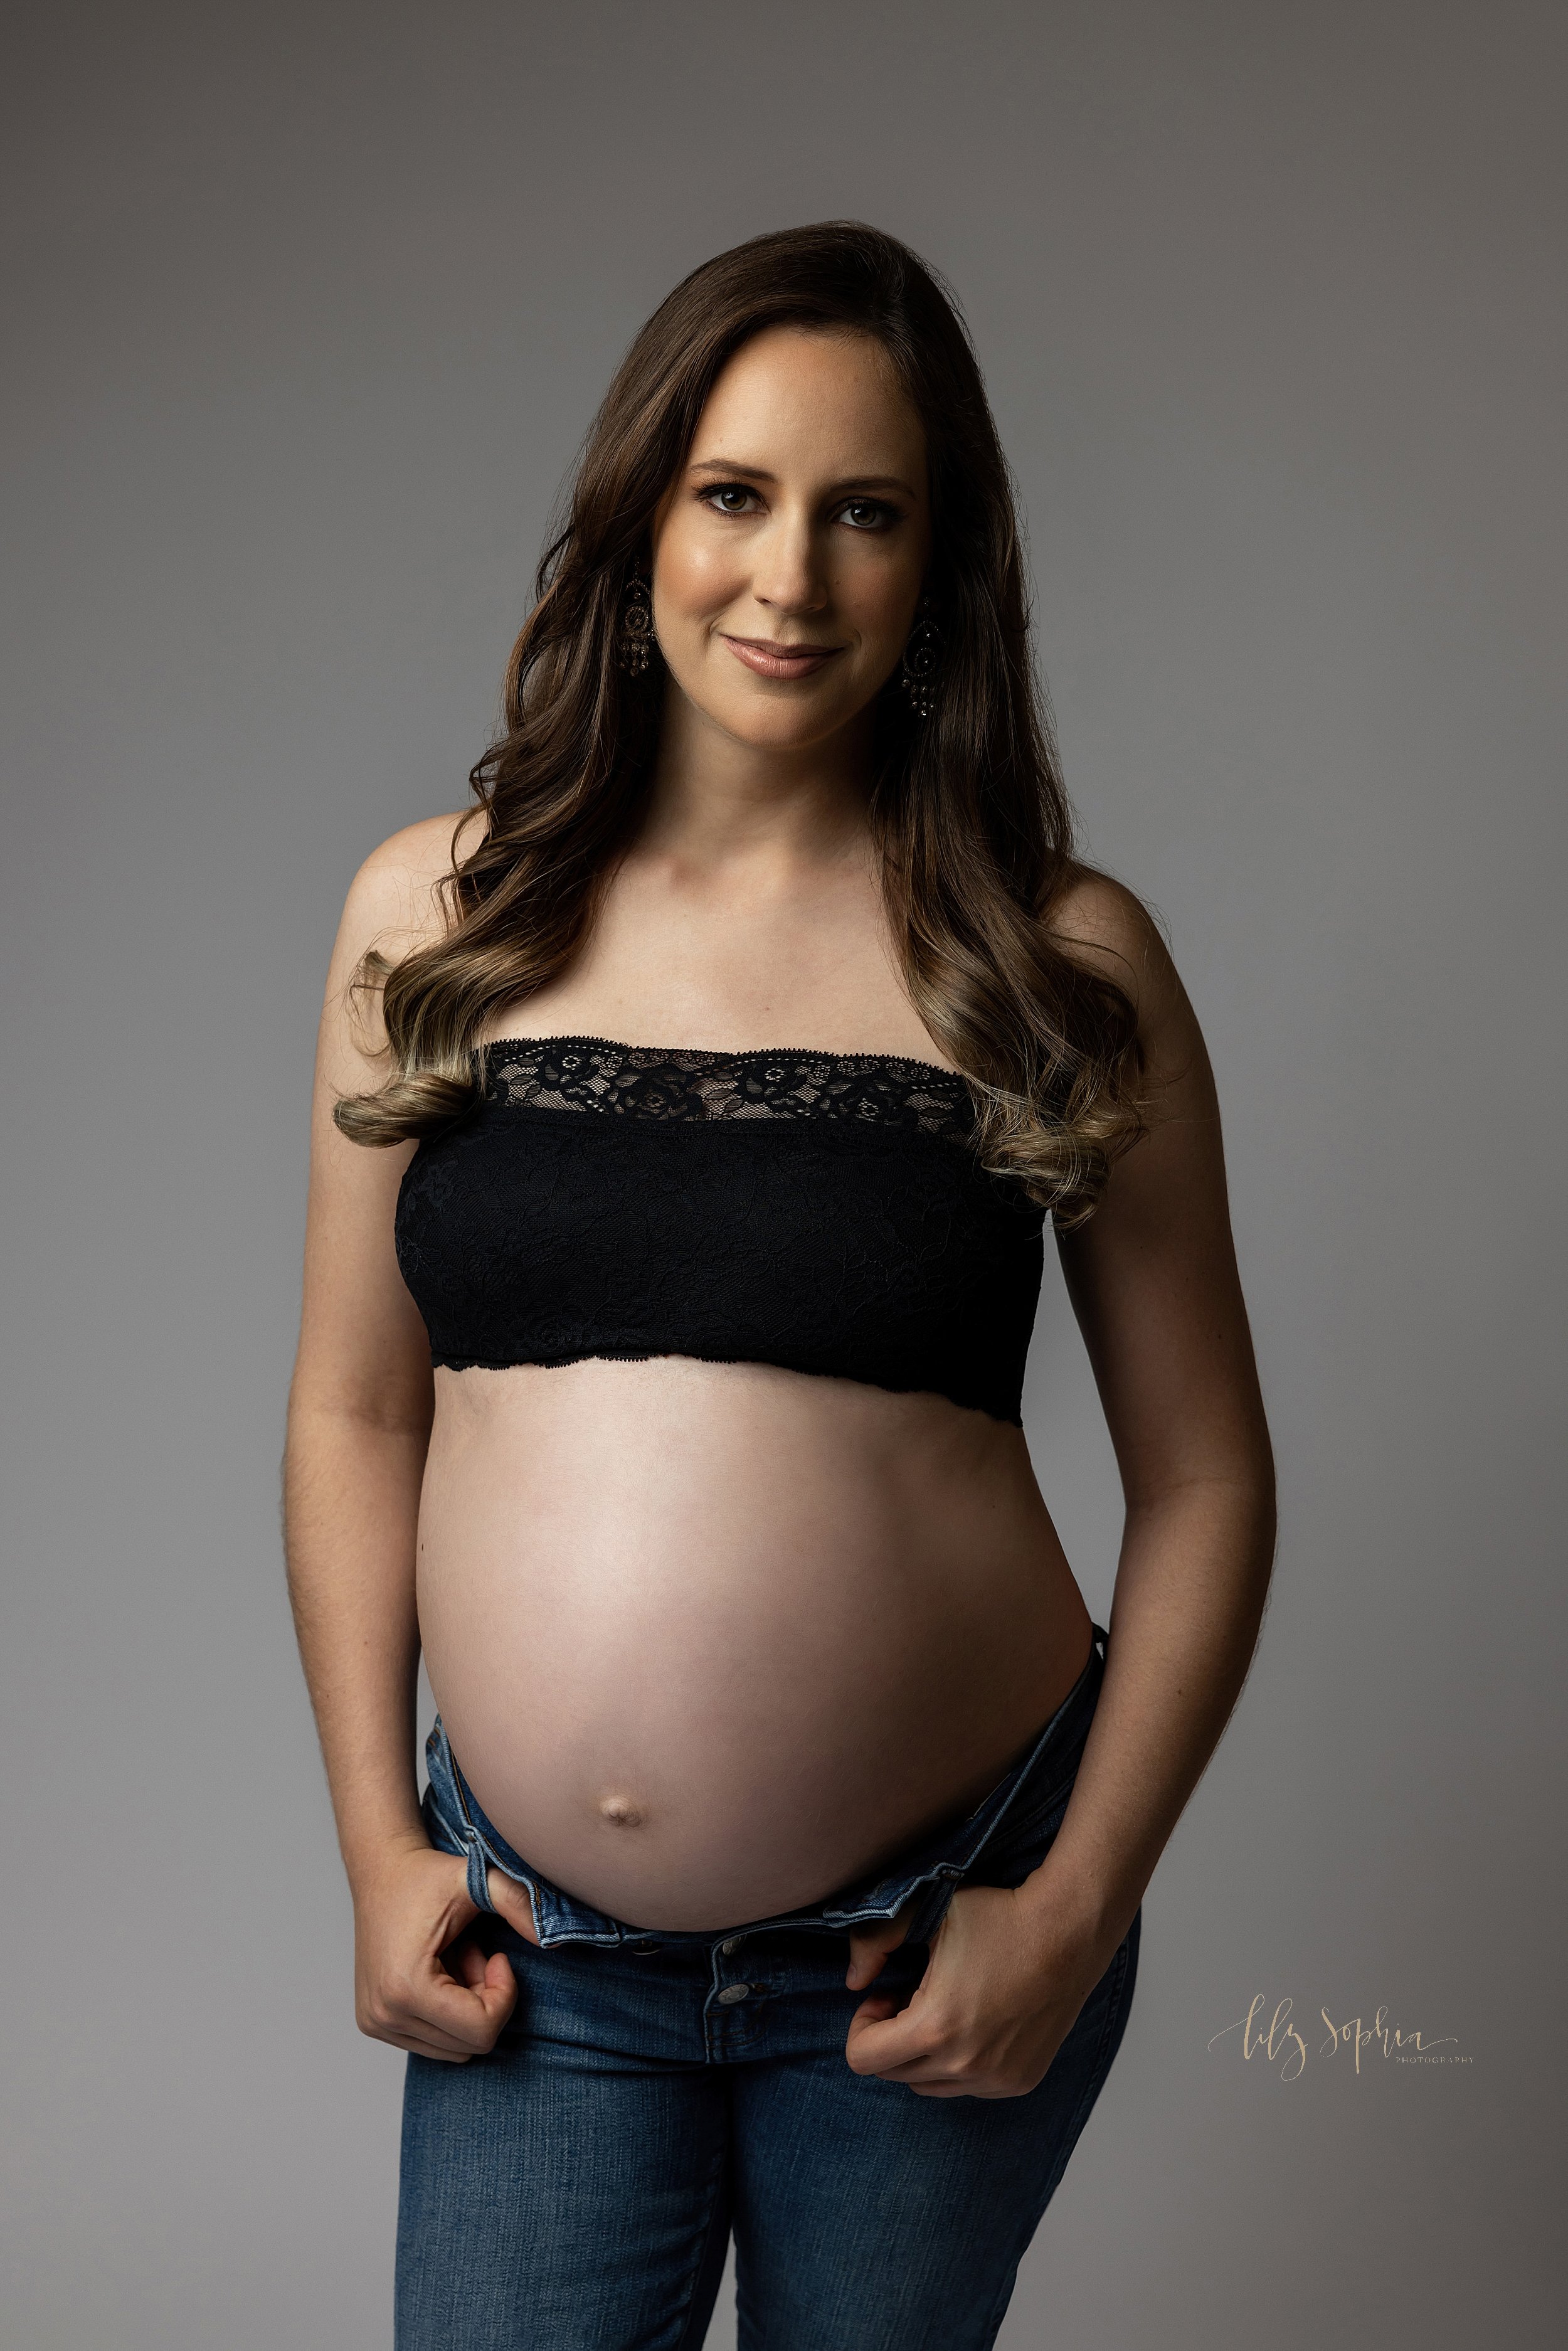  Modern maternity pictures of a pregnant woman as she stands wearing a black lace-edged bandeau bra and a pair of blue jeans with her bare belly shown as she hooks her fingers in the belt loop of her jeans taken in a studio near Morningside in Atlant